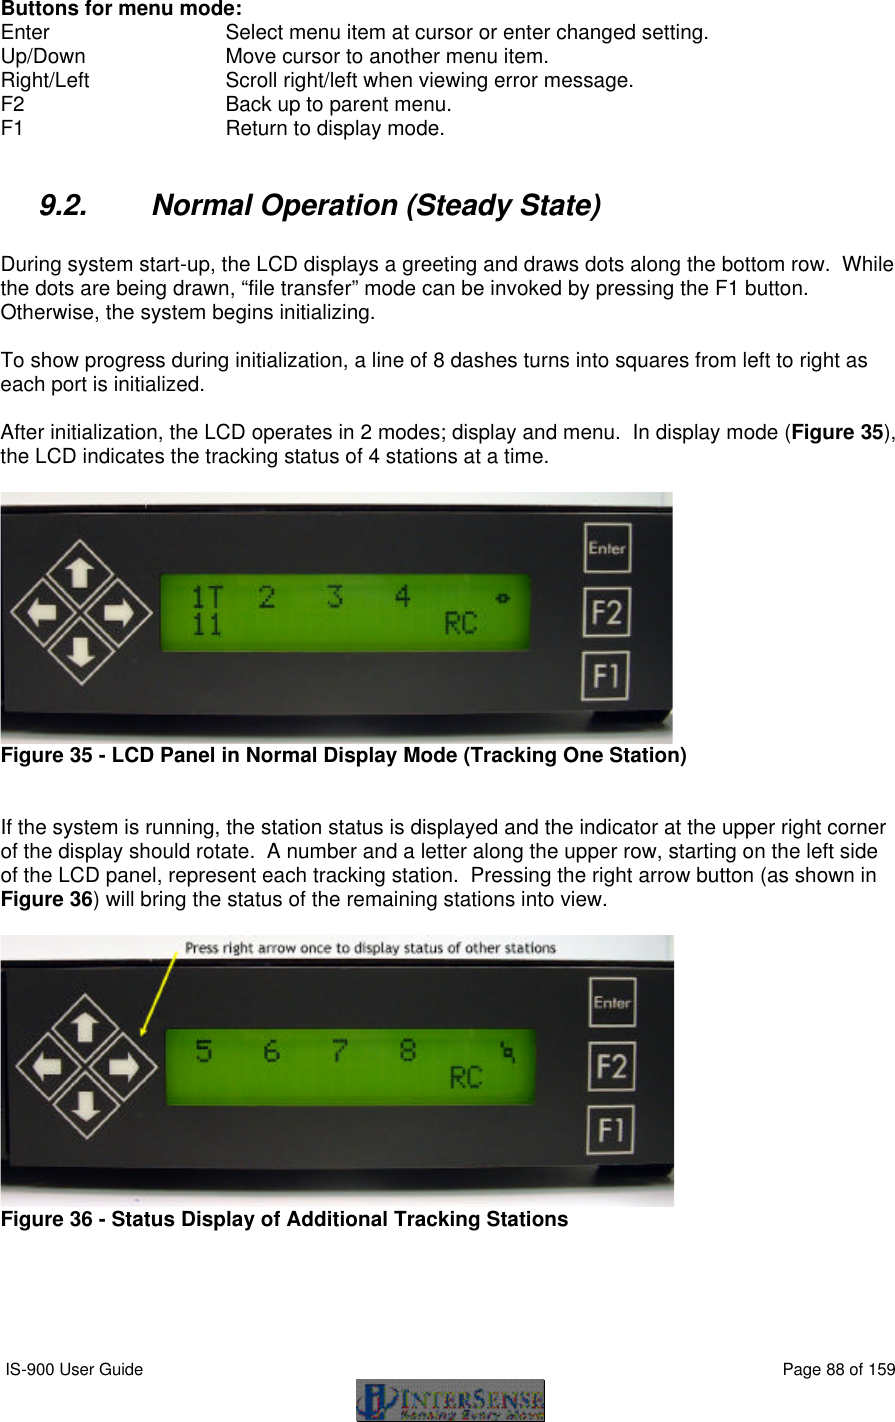  IS-900 User Guide                                                                                                                                          Page 88 of 159  Buttons for menu mode: Enter       Select menu item at cursor or enter changed setting. Up/Down     Move cursor to another menu item. Right/Left     Scroll right/left when viewing error message. F2       Back up to parent menu. F1       Return to display mode.  9.2. Normal Operation (Steady State)  During system start-up, the LCD displays a greeting and draws dots along the bottom row.  While the dots are being drawn, “file transfer” mode can be invoked by pressing the F1 button.  Otherwise, the system begins initializing.  To show progress during initialization, a line of 8 dashes turns into squares from left to right as each port is initialized.  After initialization, the LCD operates in 2 modes; display and menu.  In display mode (Figure 35), the LCD indicates the tracking status of 4 stations at a time.   Figure 35 - LCD Panel in Normal Display Mode (Tracking One Station)   If the system is running, the station status is displayed and the indicator at the upper right corner of the display should rotate.  A number and a letter along the upper row, starting on the left side of the LCD panel, represent each tracking station.  Pressing the right arrow button (as shown in Figure 36) will bring the status of the remaining stations into view.   Figure 36 - Status Display of Additional Tracking Stations  